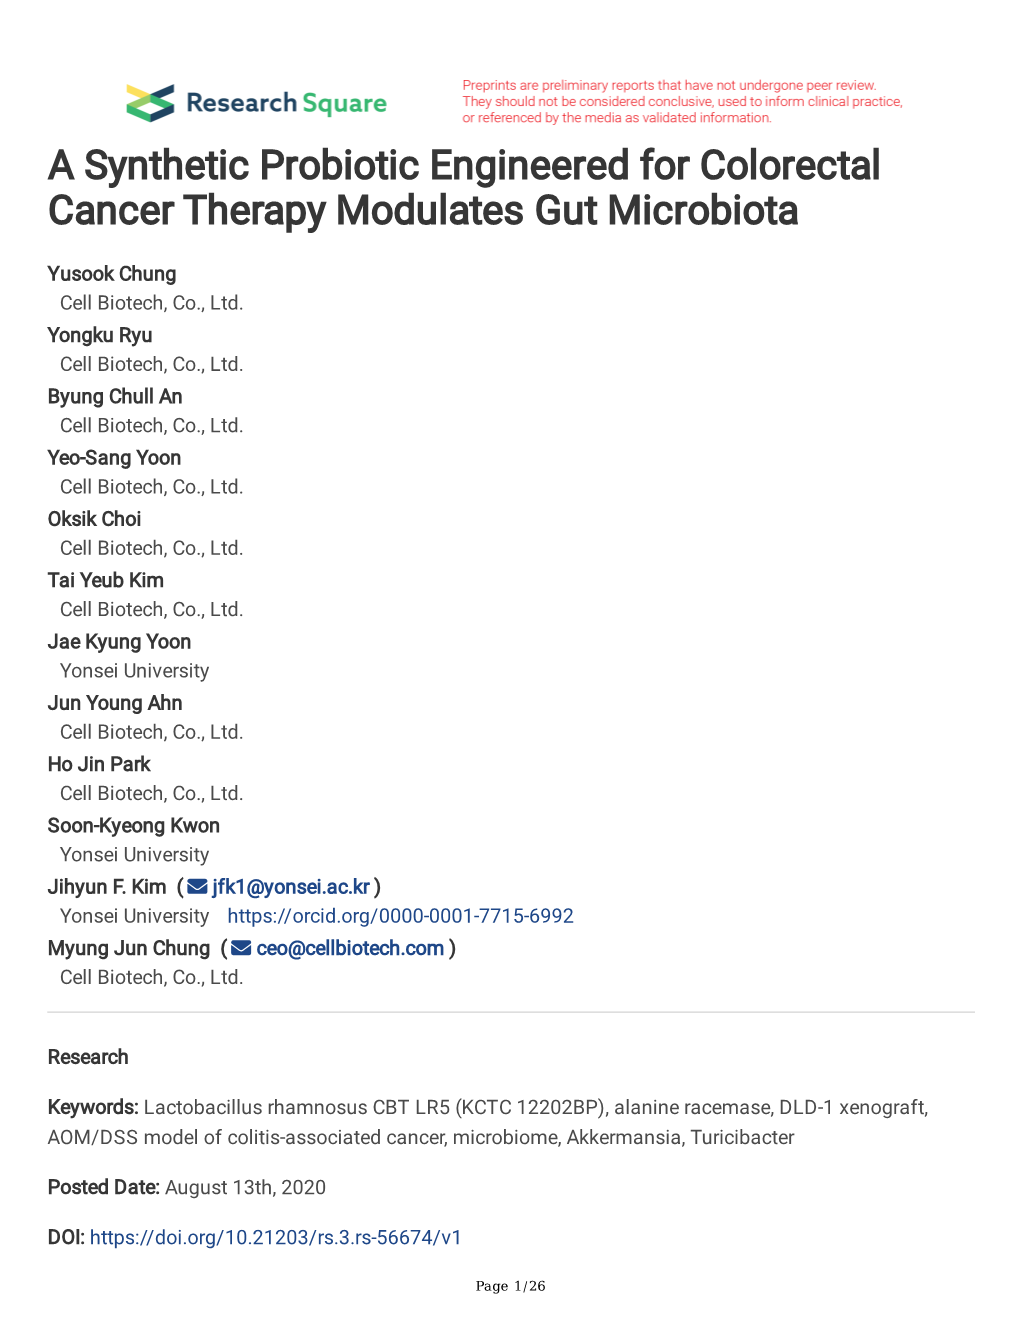 A Synthetic Probiotic Engineered for Colorectal Cancer Therapy Modulates Gut Microbiota